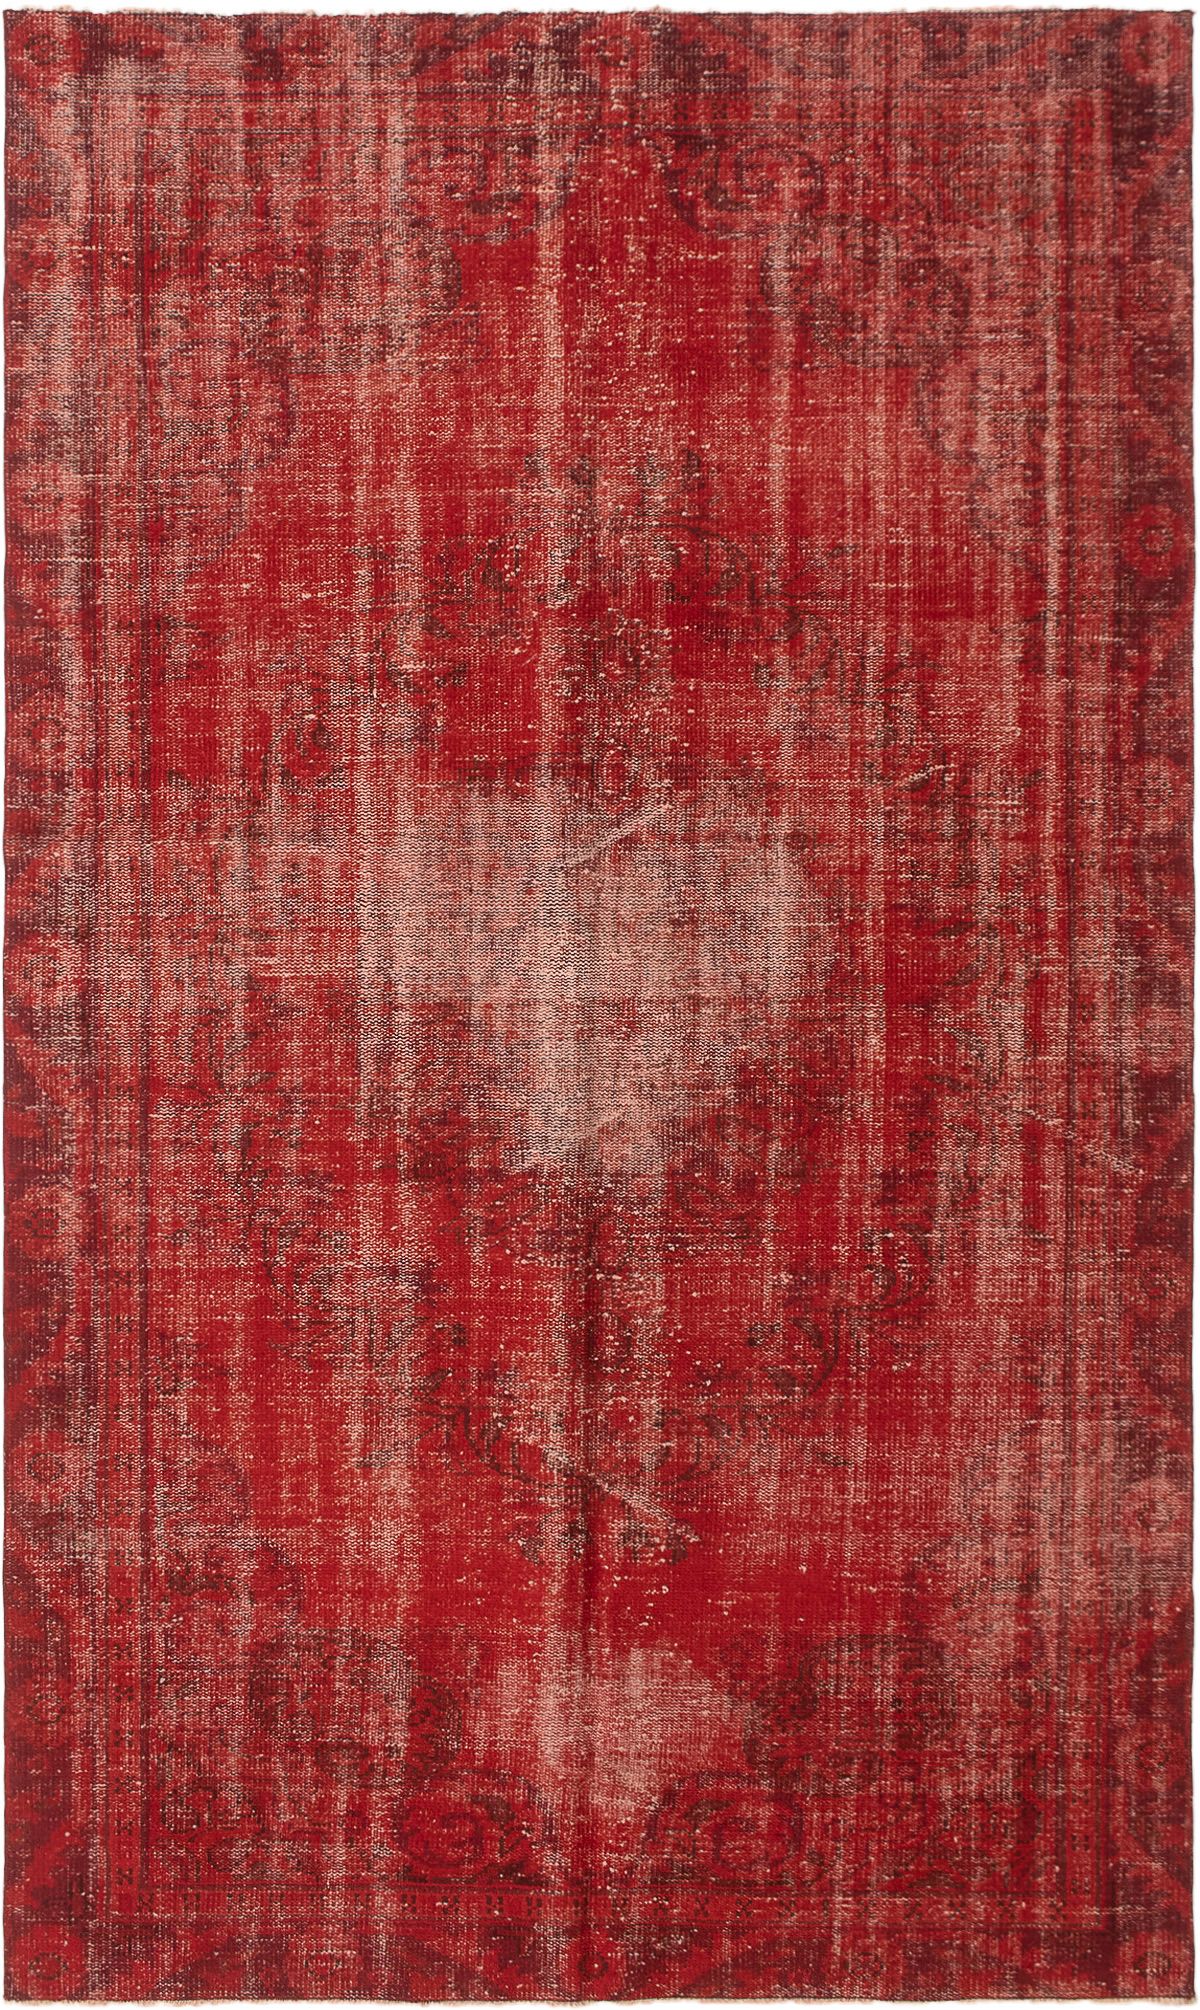 Hand-knotted Color Transition Dark Red Wool Rug 5'9" x 9'10" Size: 5'9" x 9'11"  